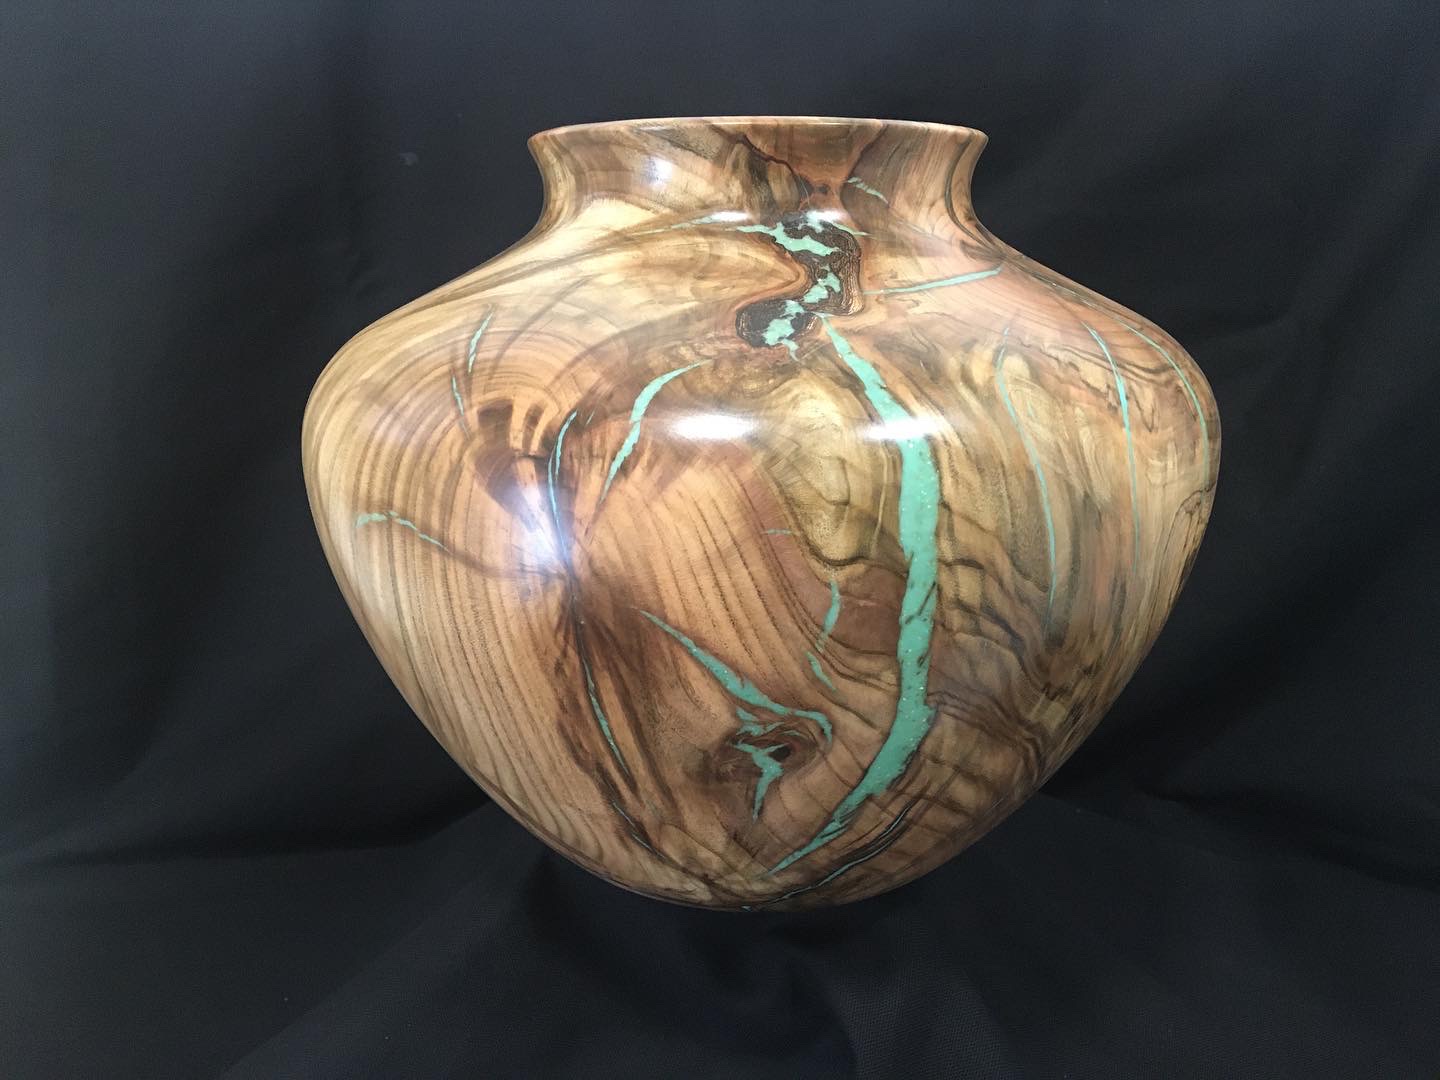 Pistachio with turquoise inlay